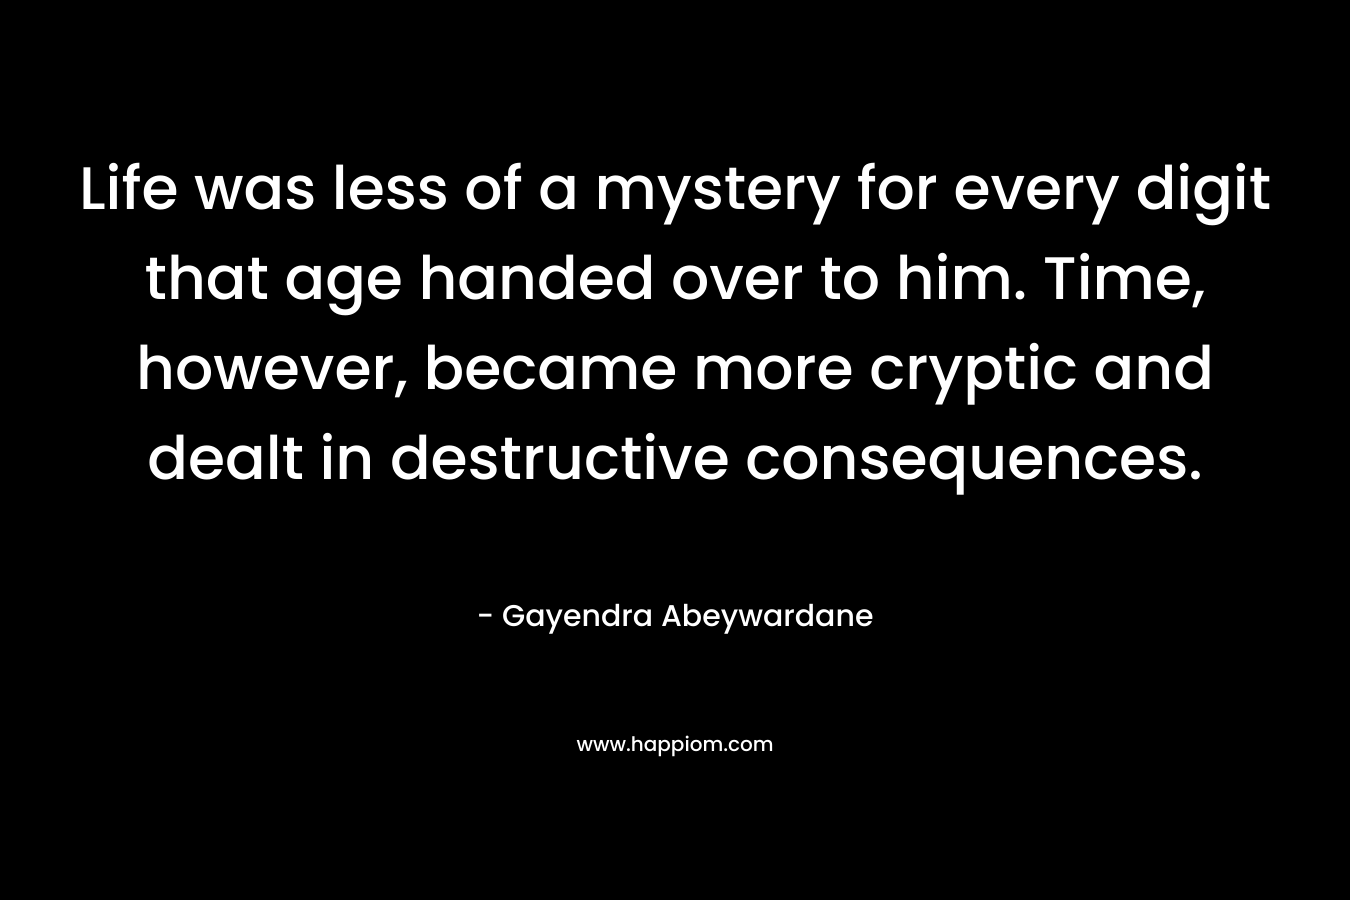 Life was less of a mystery for every digit that age handed over to him. Time, however, became more cryptic and dealt in destructive consequences. – Gayendra Abeywardane